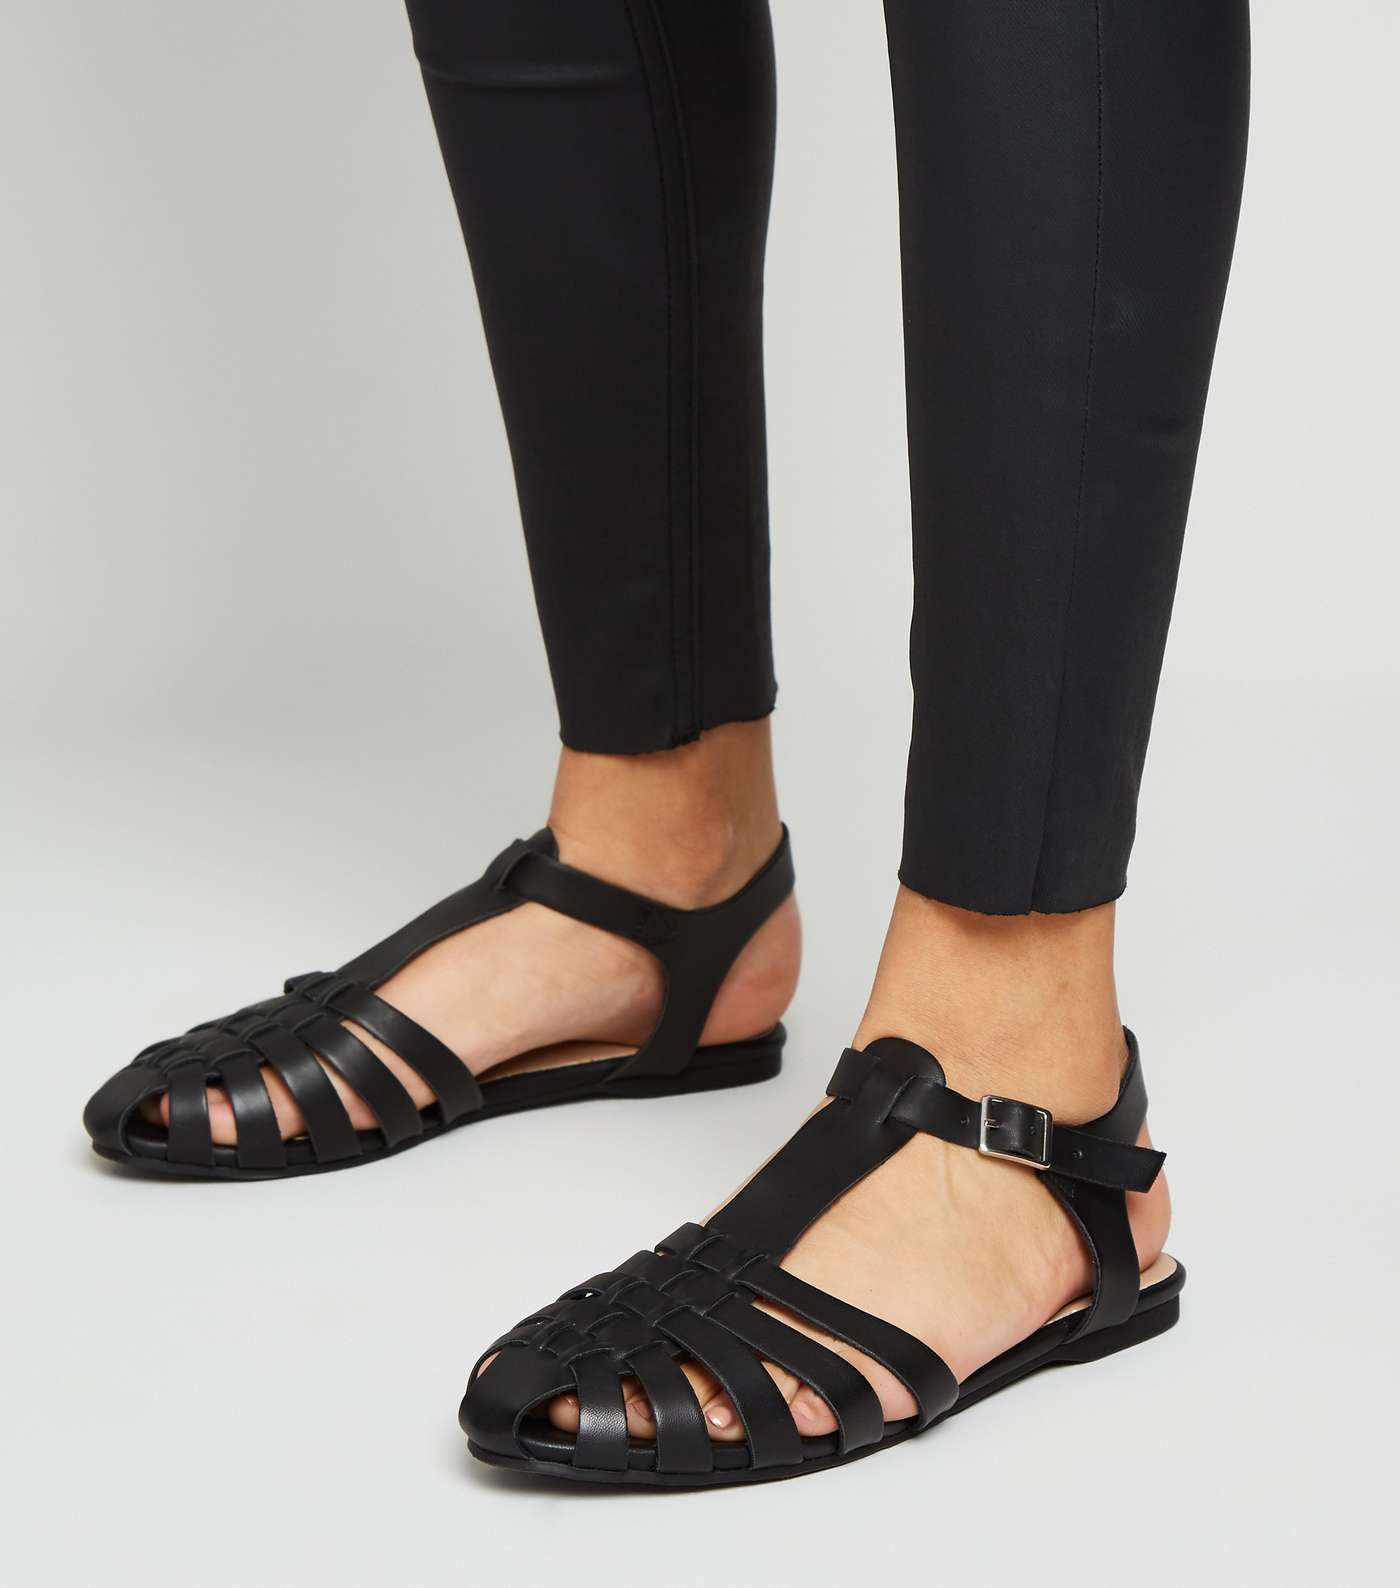 Girls Black Leather-Look Caged T-Bar Shoes Image 2